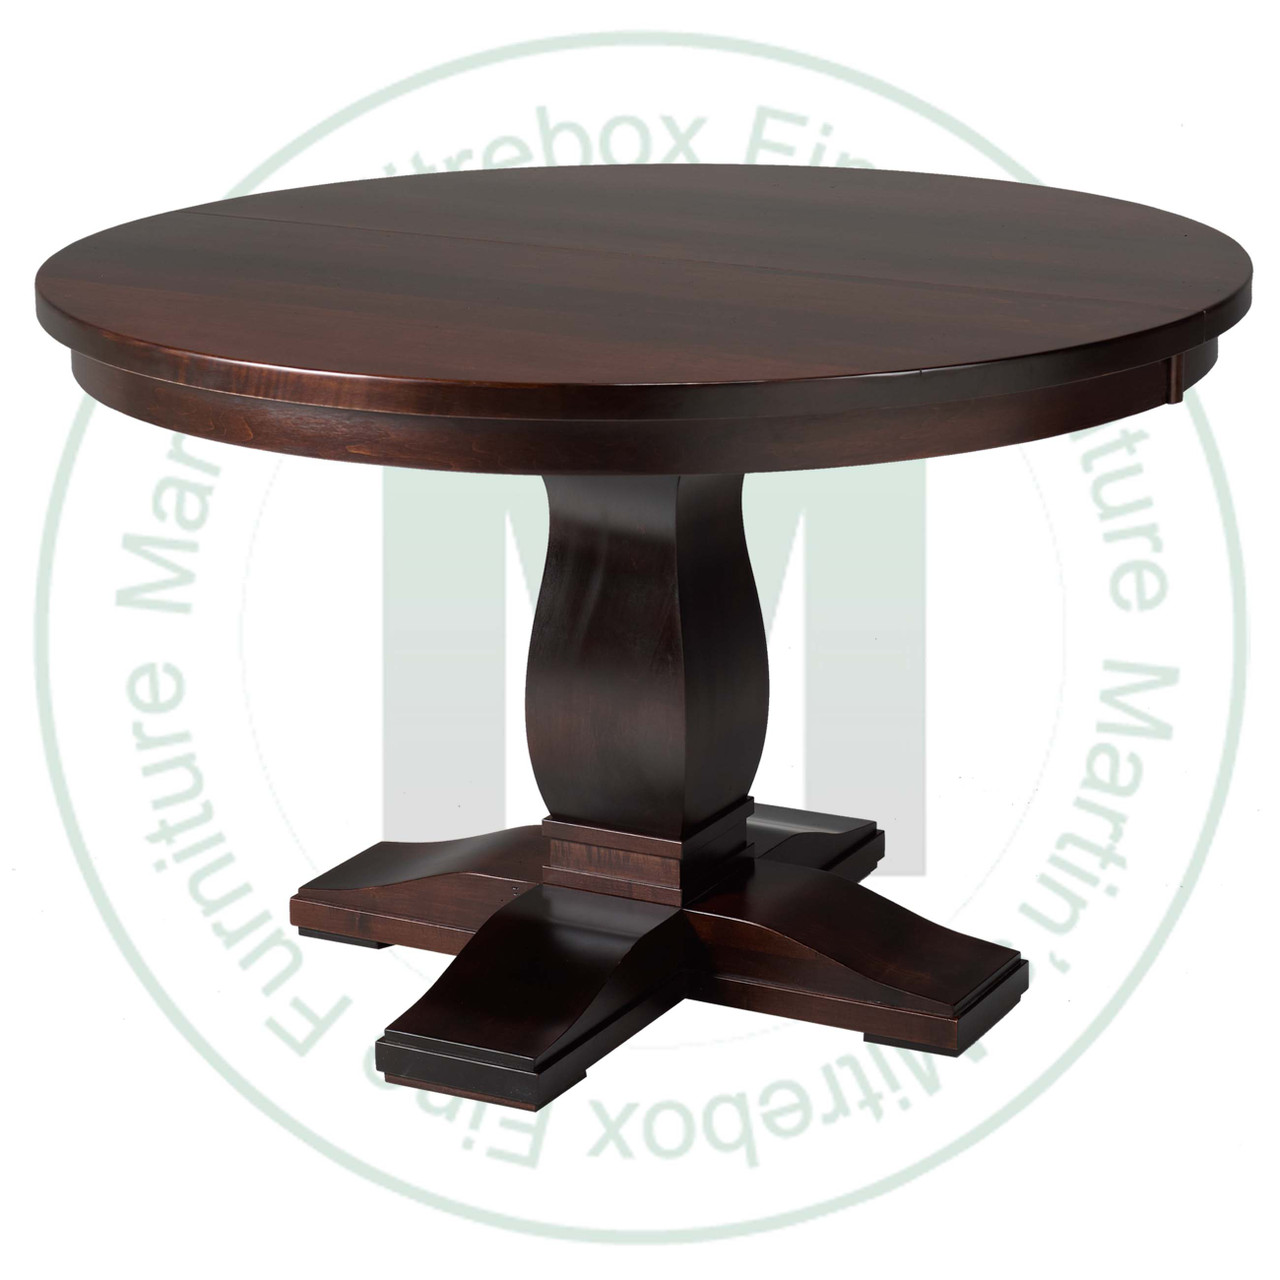 Oak Valencia Single Pedestal Table 48''D x 54''W x 30''H Round Solid Table. Table Has 1'' Thick Top.